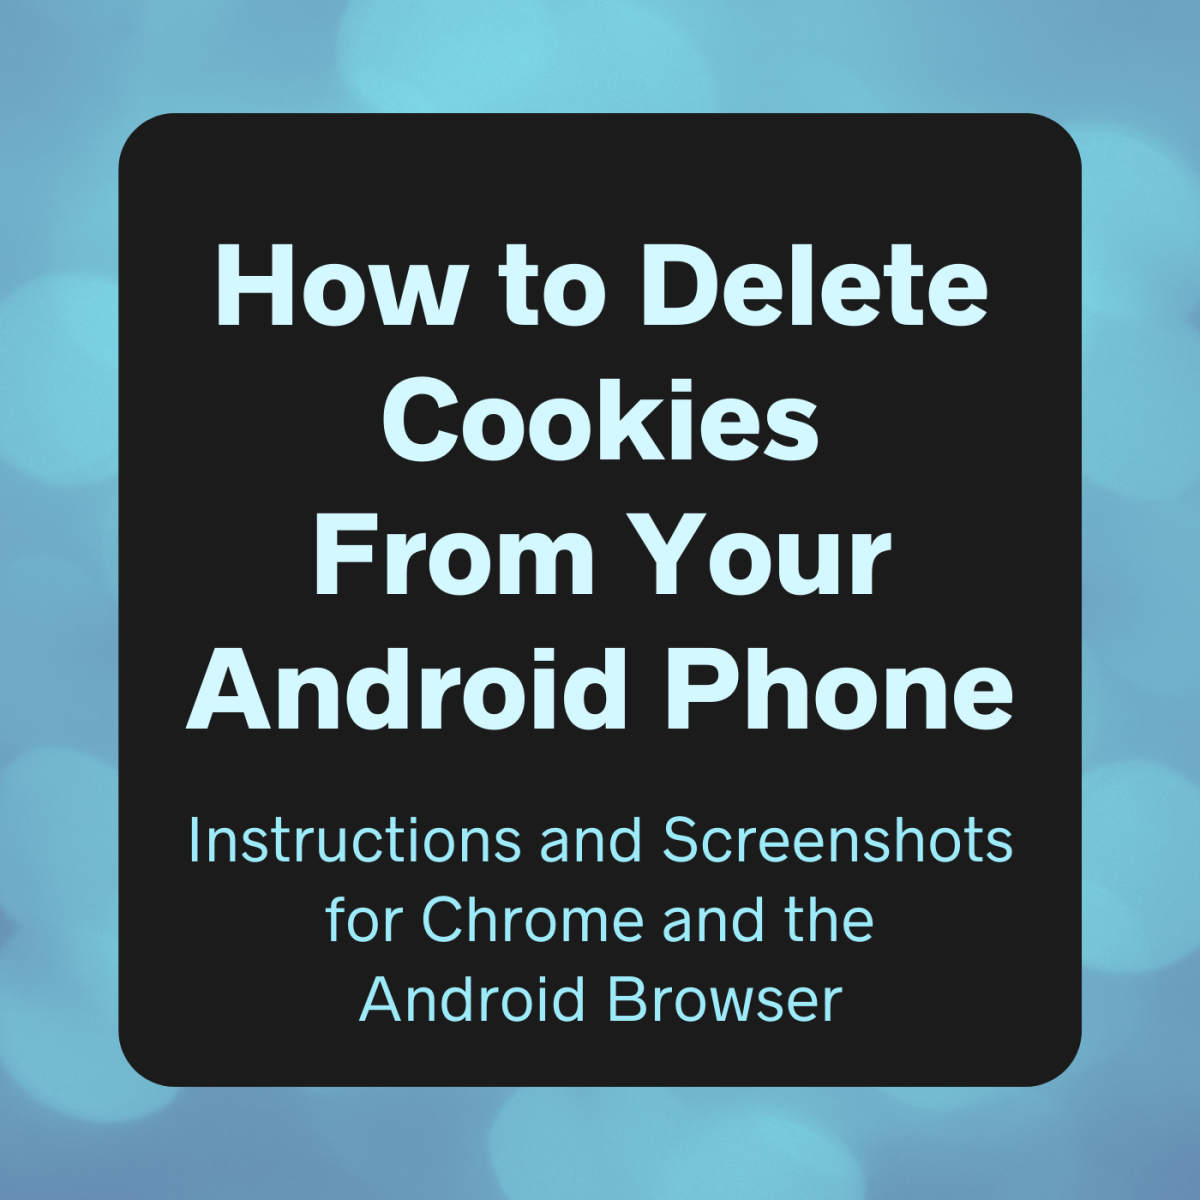 How to Delete Internet Cookies on Android Phones